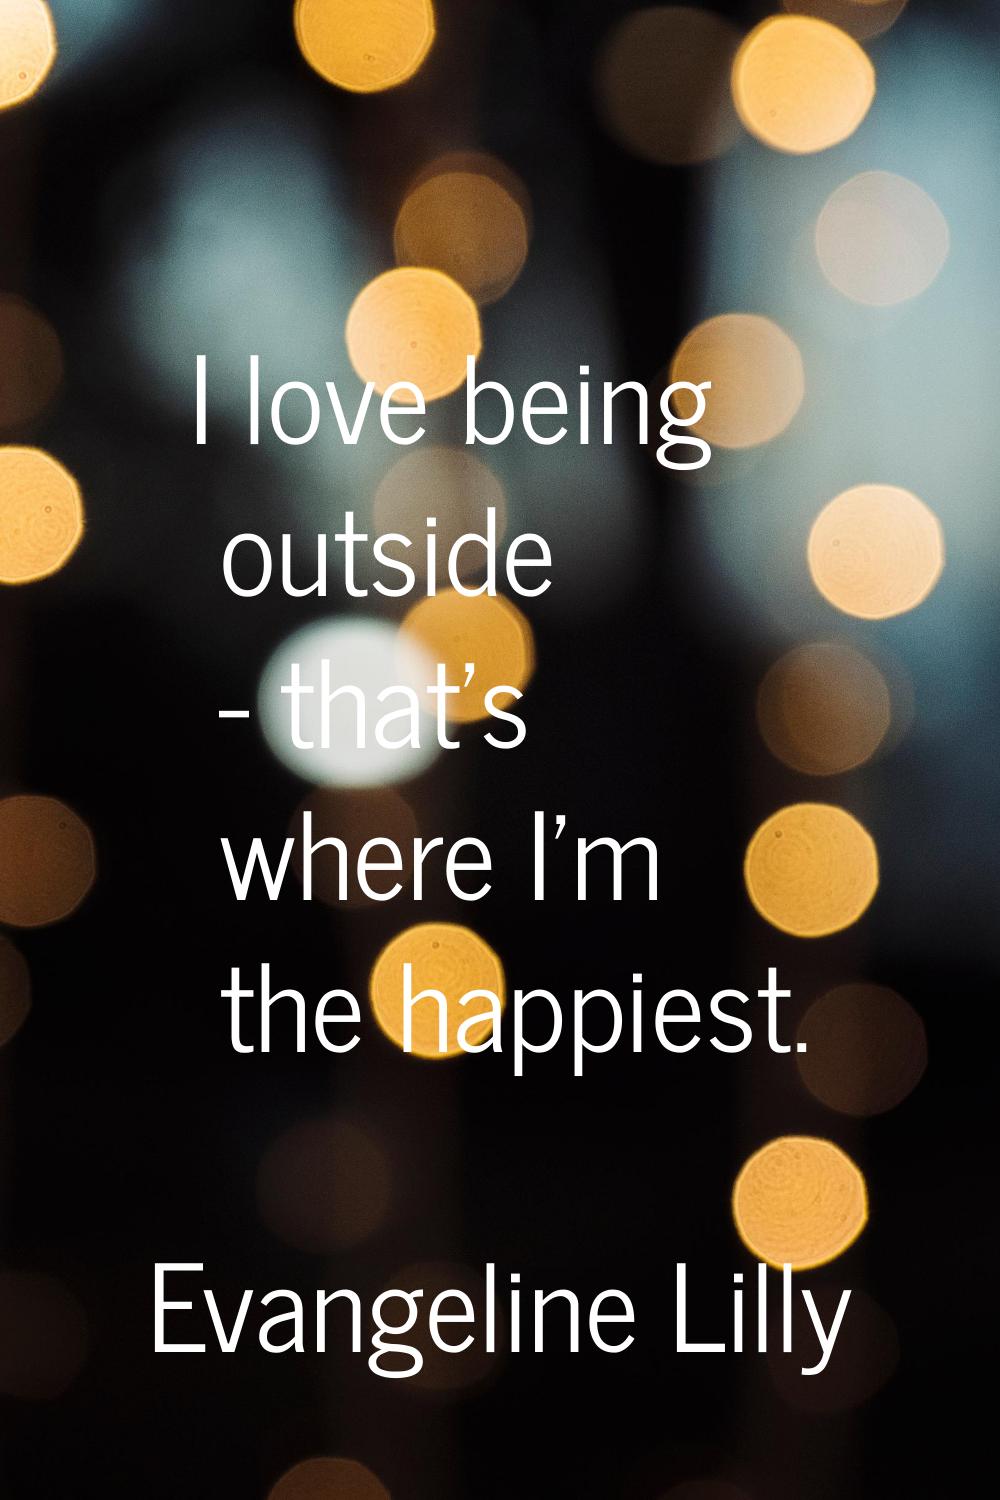 I love being outside - that's where I'm the happiest.